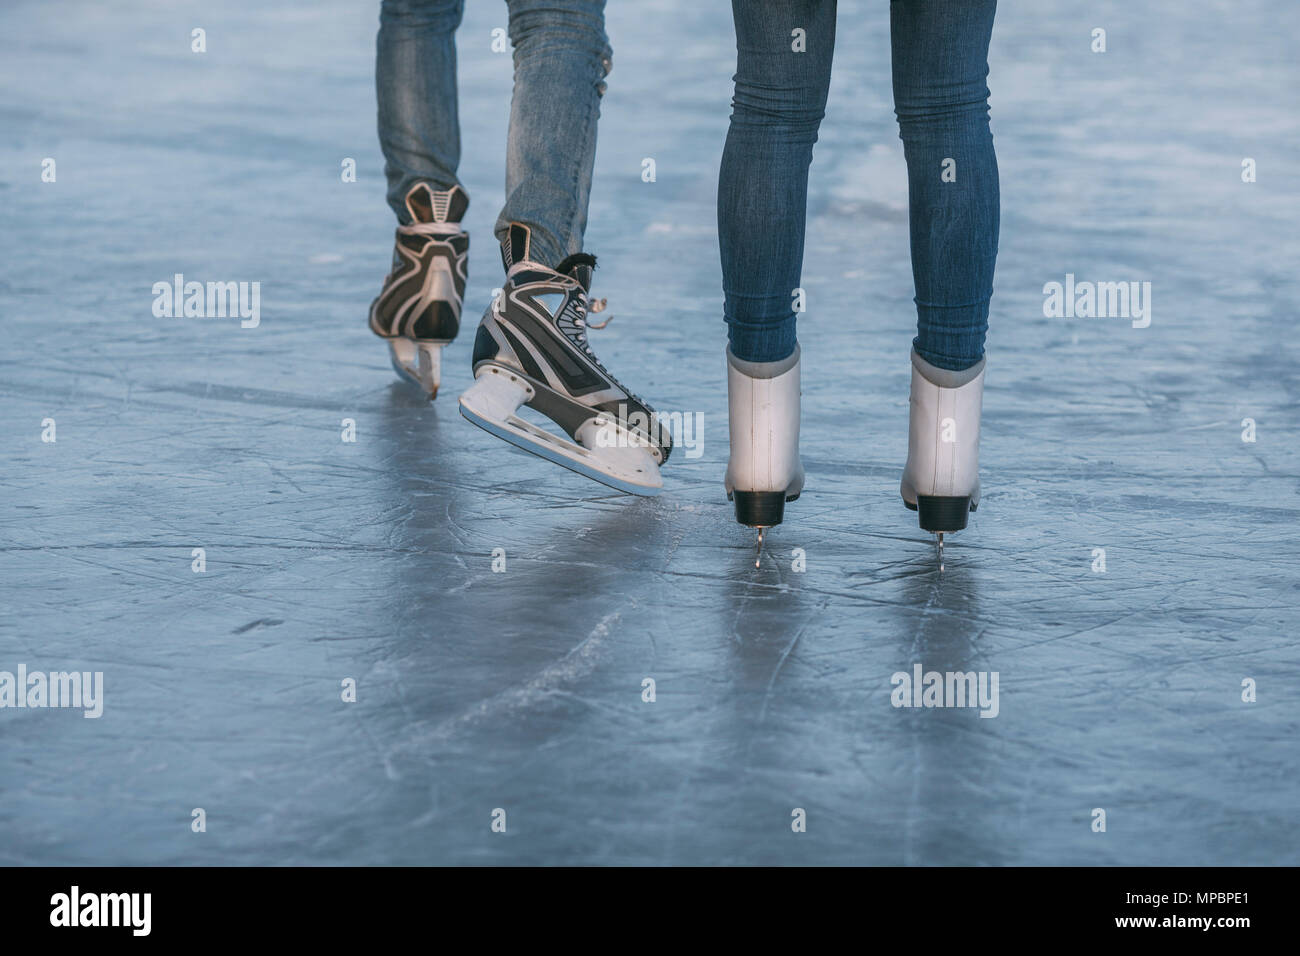 Low section of couple ice-skating on rink Stock Photo